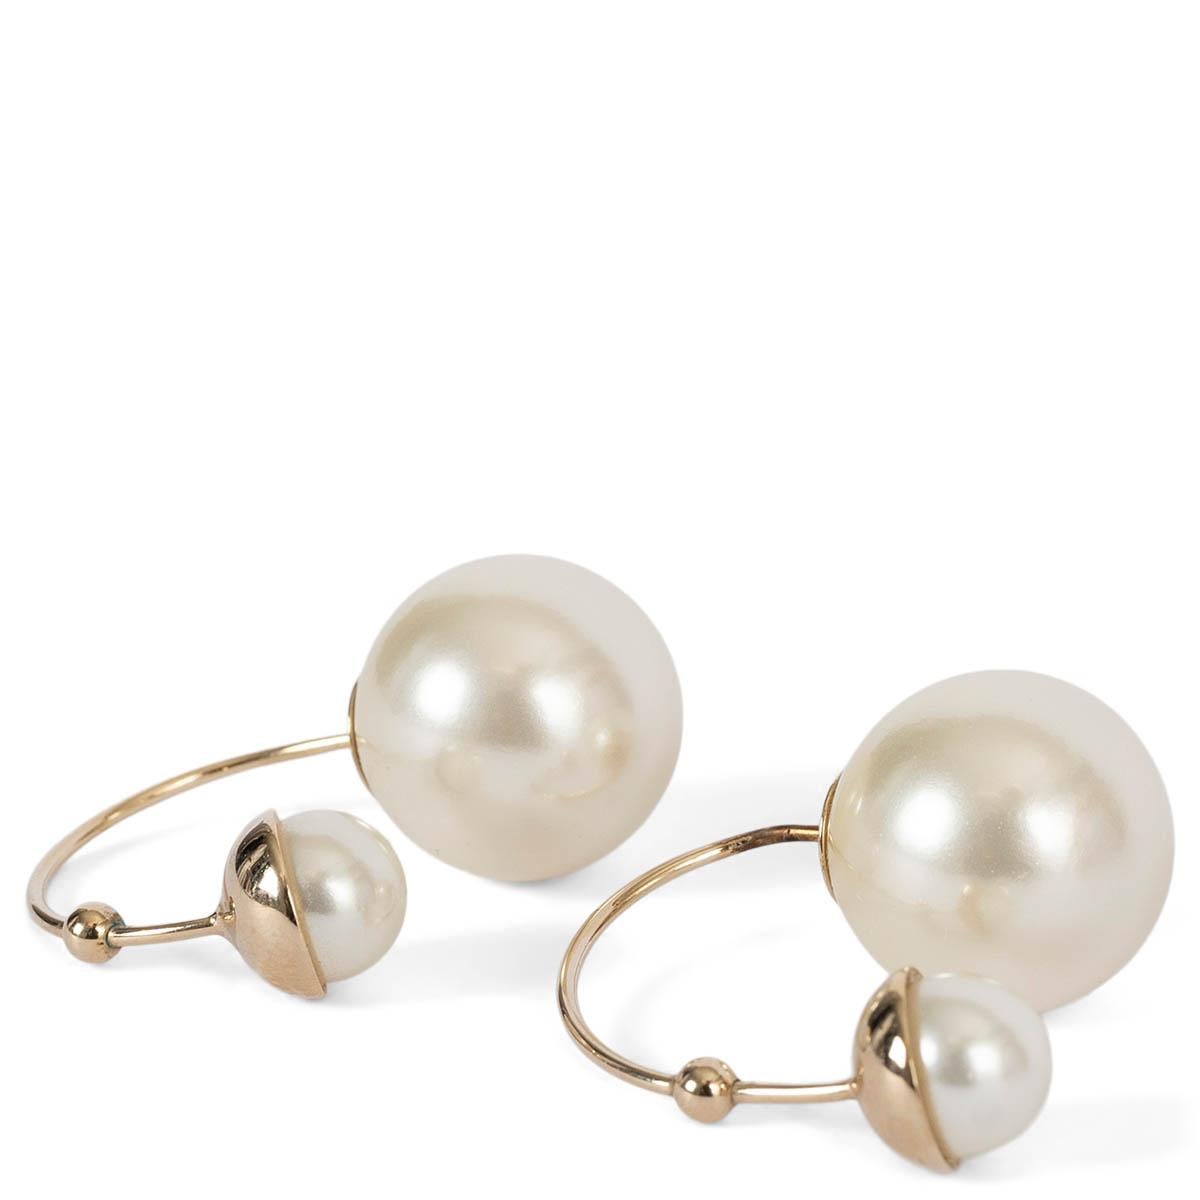 100% authentic Christian Dior Ultradior earrings in gold-tone metal with small and large faux pearl. Have been worn and are in excellent condition. 

All our listings include only the listed item unless otherwise specified in the description above